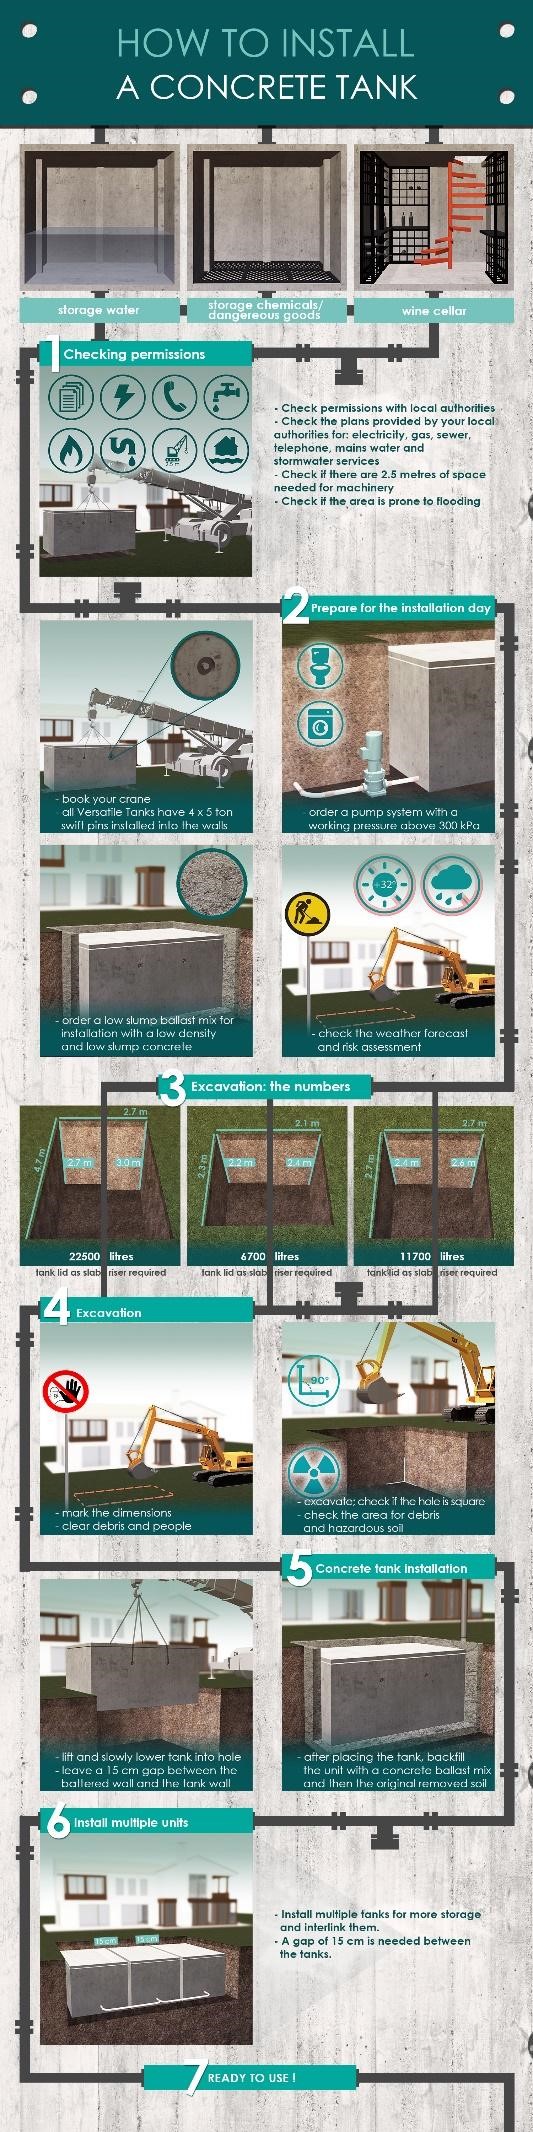 How to Install a Concrete Tank